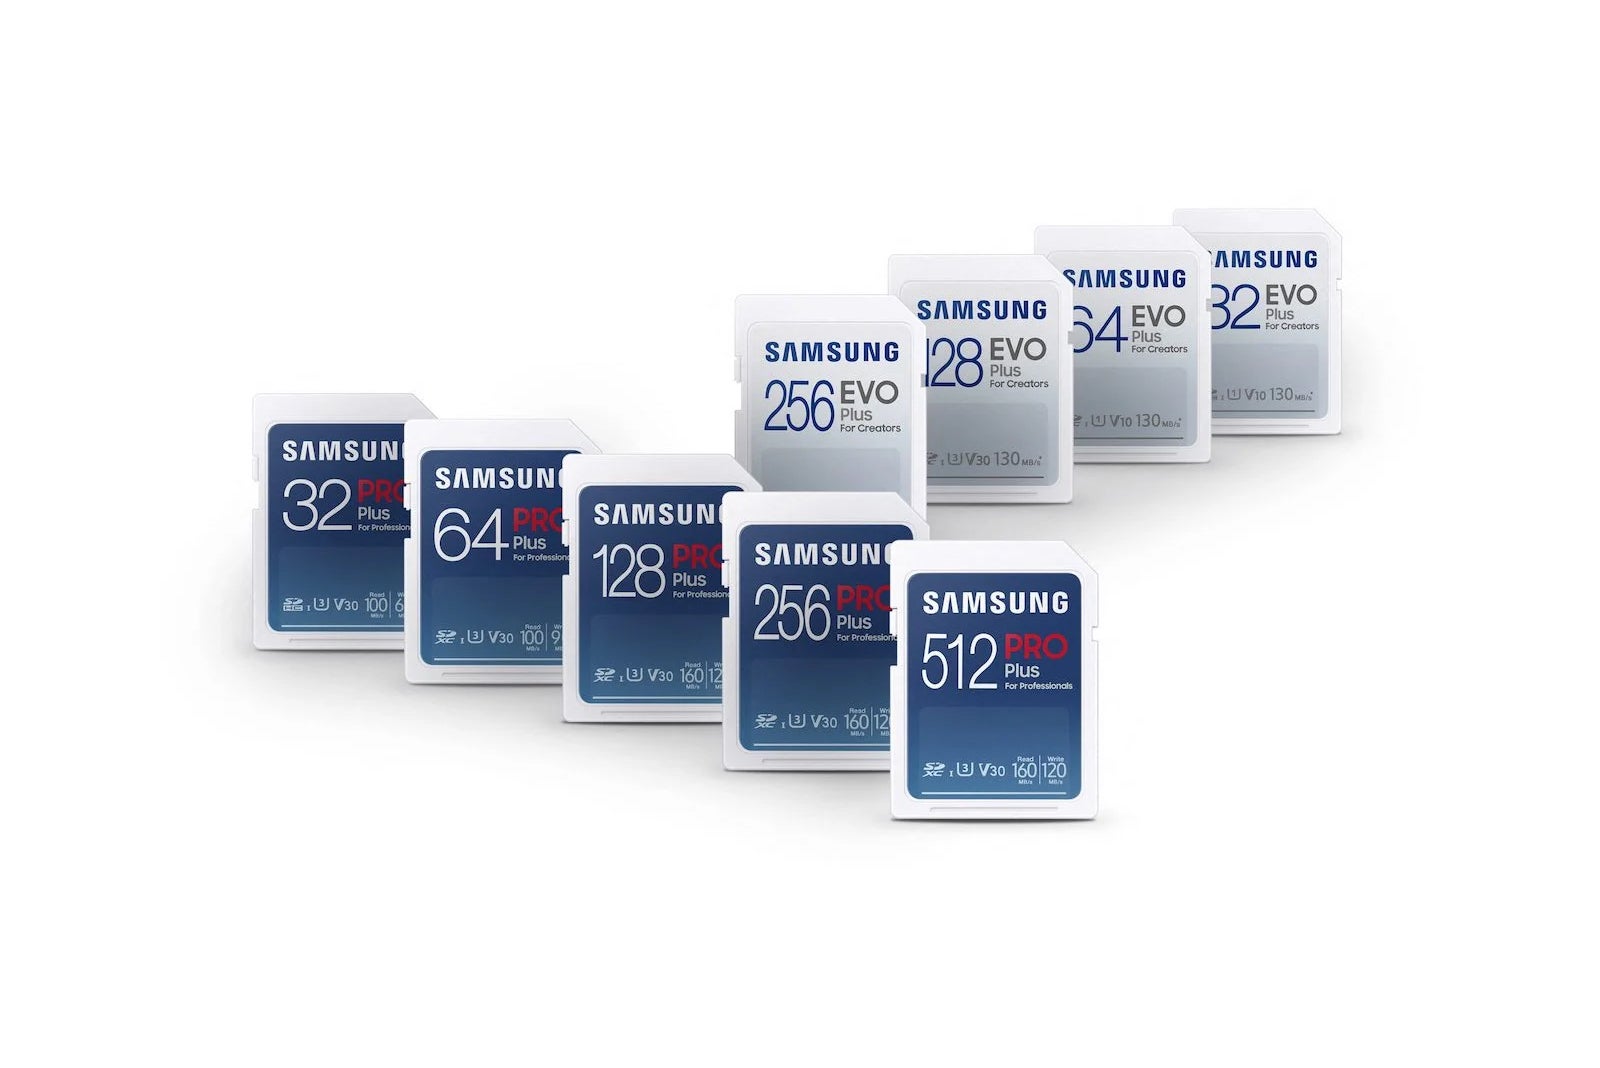 Samsung unveils new micro SD cards (and your Galaxy flagship can't even use them)